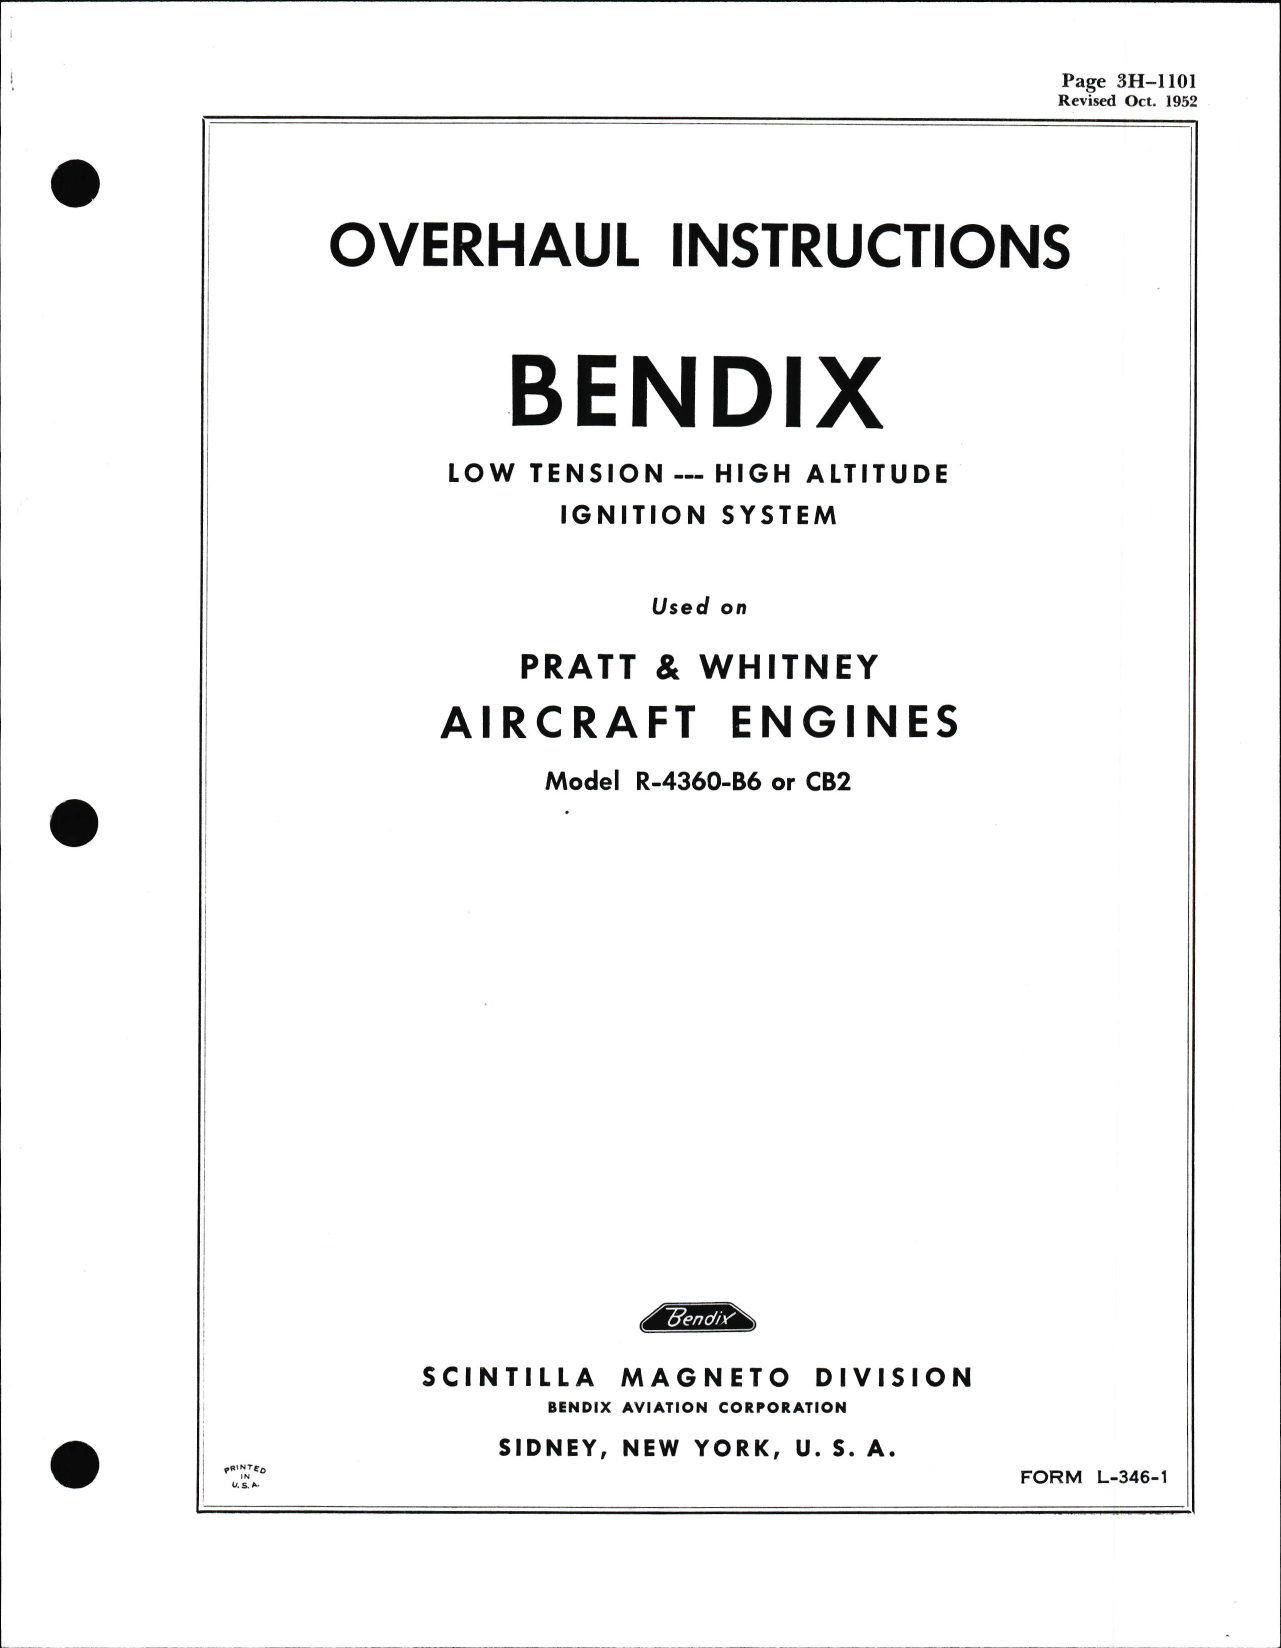 Sample page 1 from AirCorps Library document: Overhaul Instructions for Bendix Low Tension - High Altitude Ignition for Pratt & Whitney R-4360-B6 or CB2